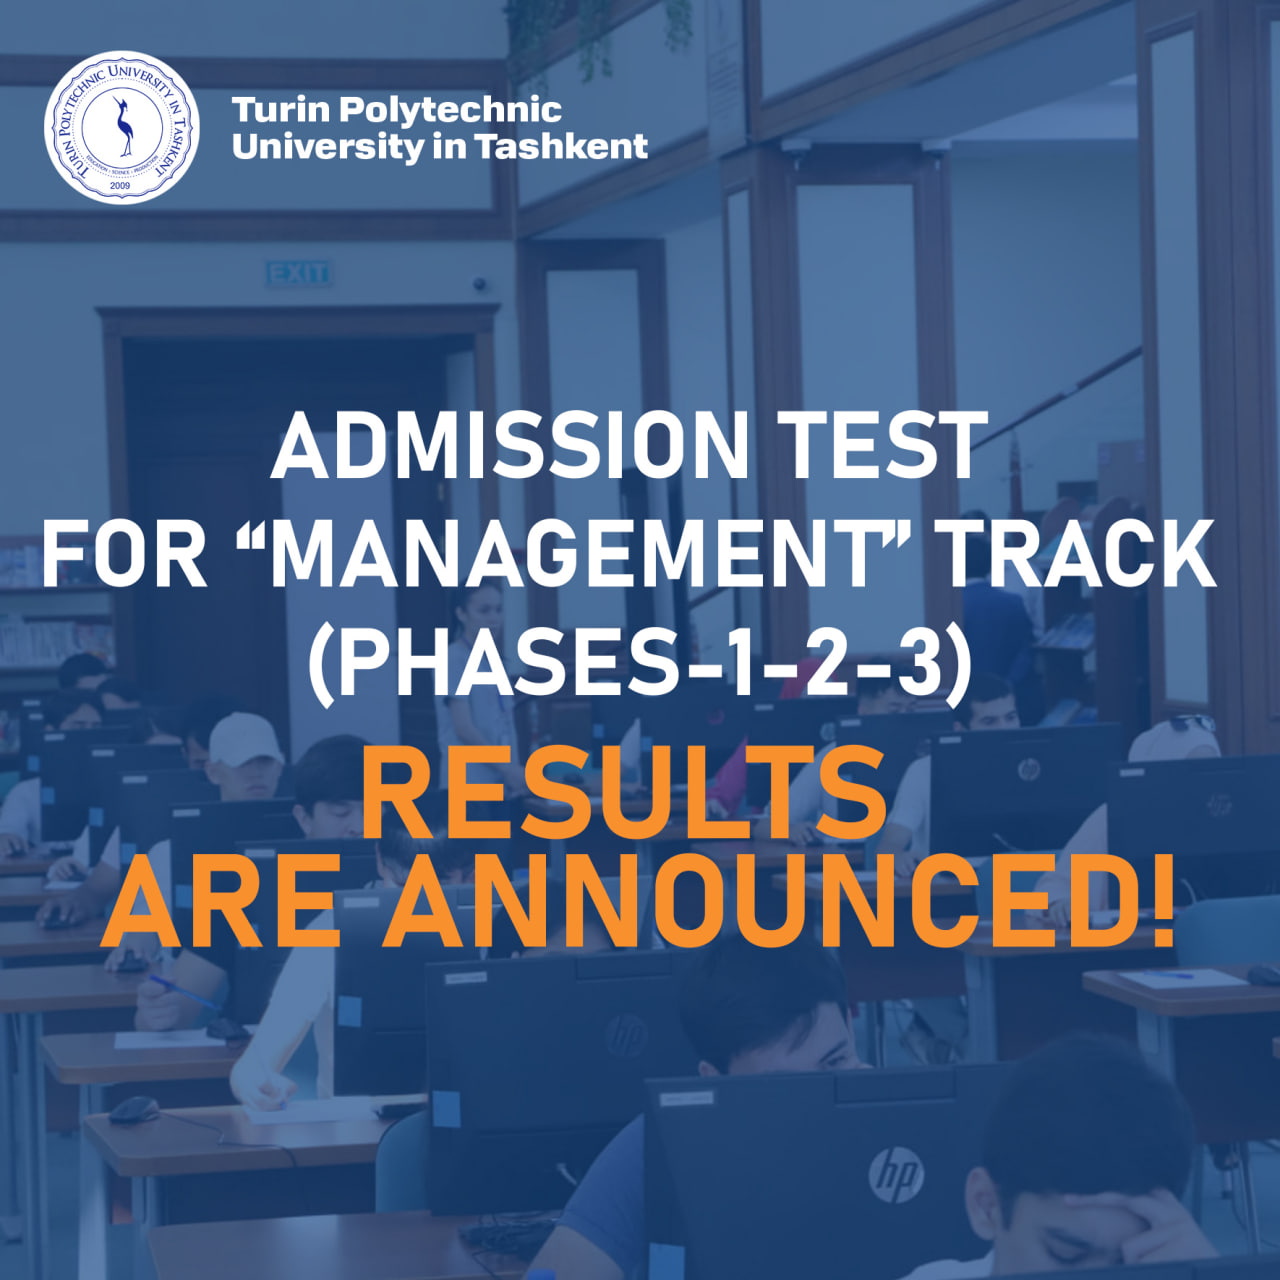 You are currently viewing Admission Test for “Management” Track (Phases-1-2-3)Results are announced!